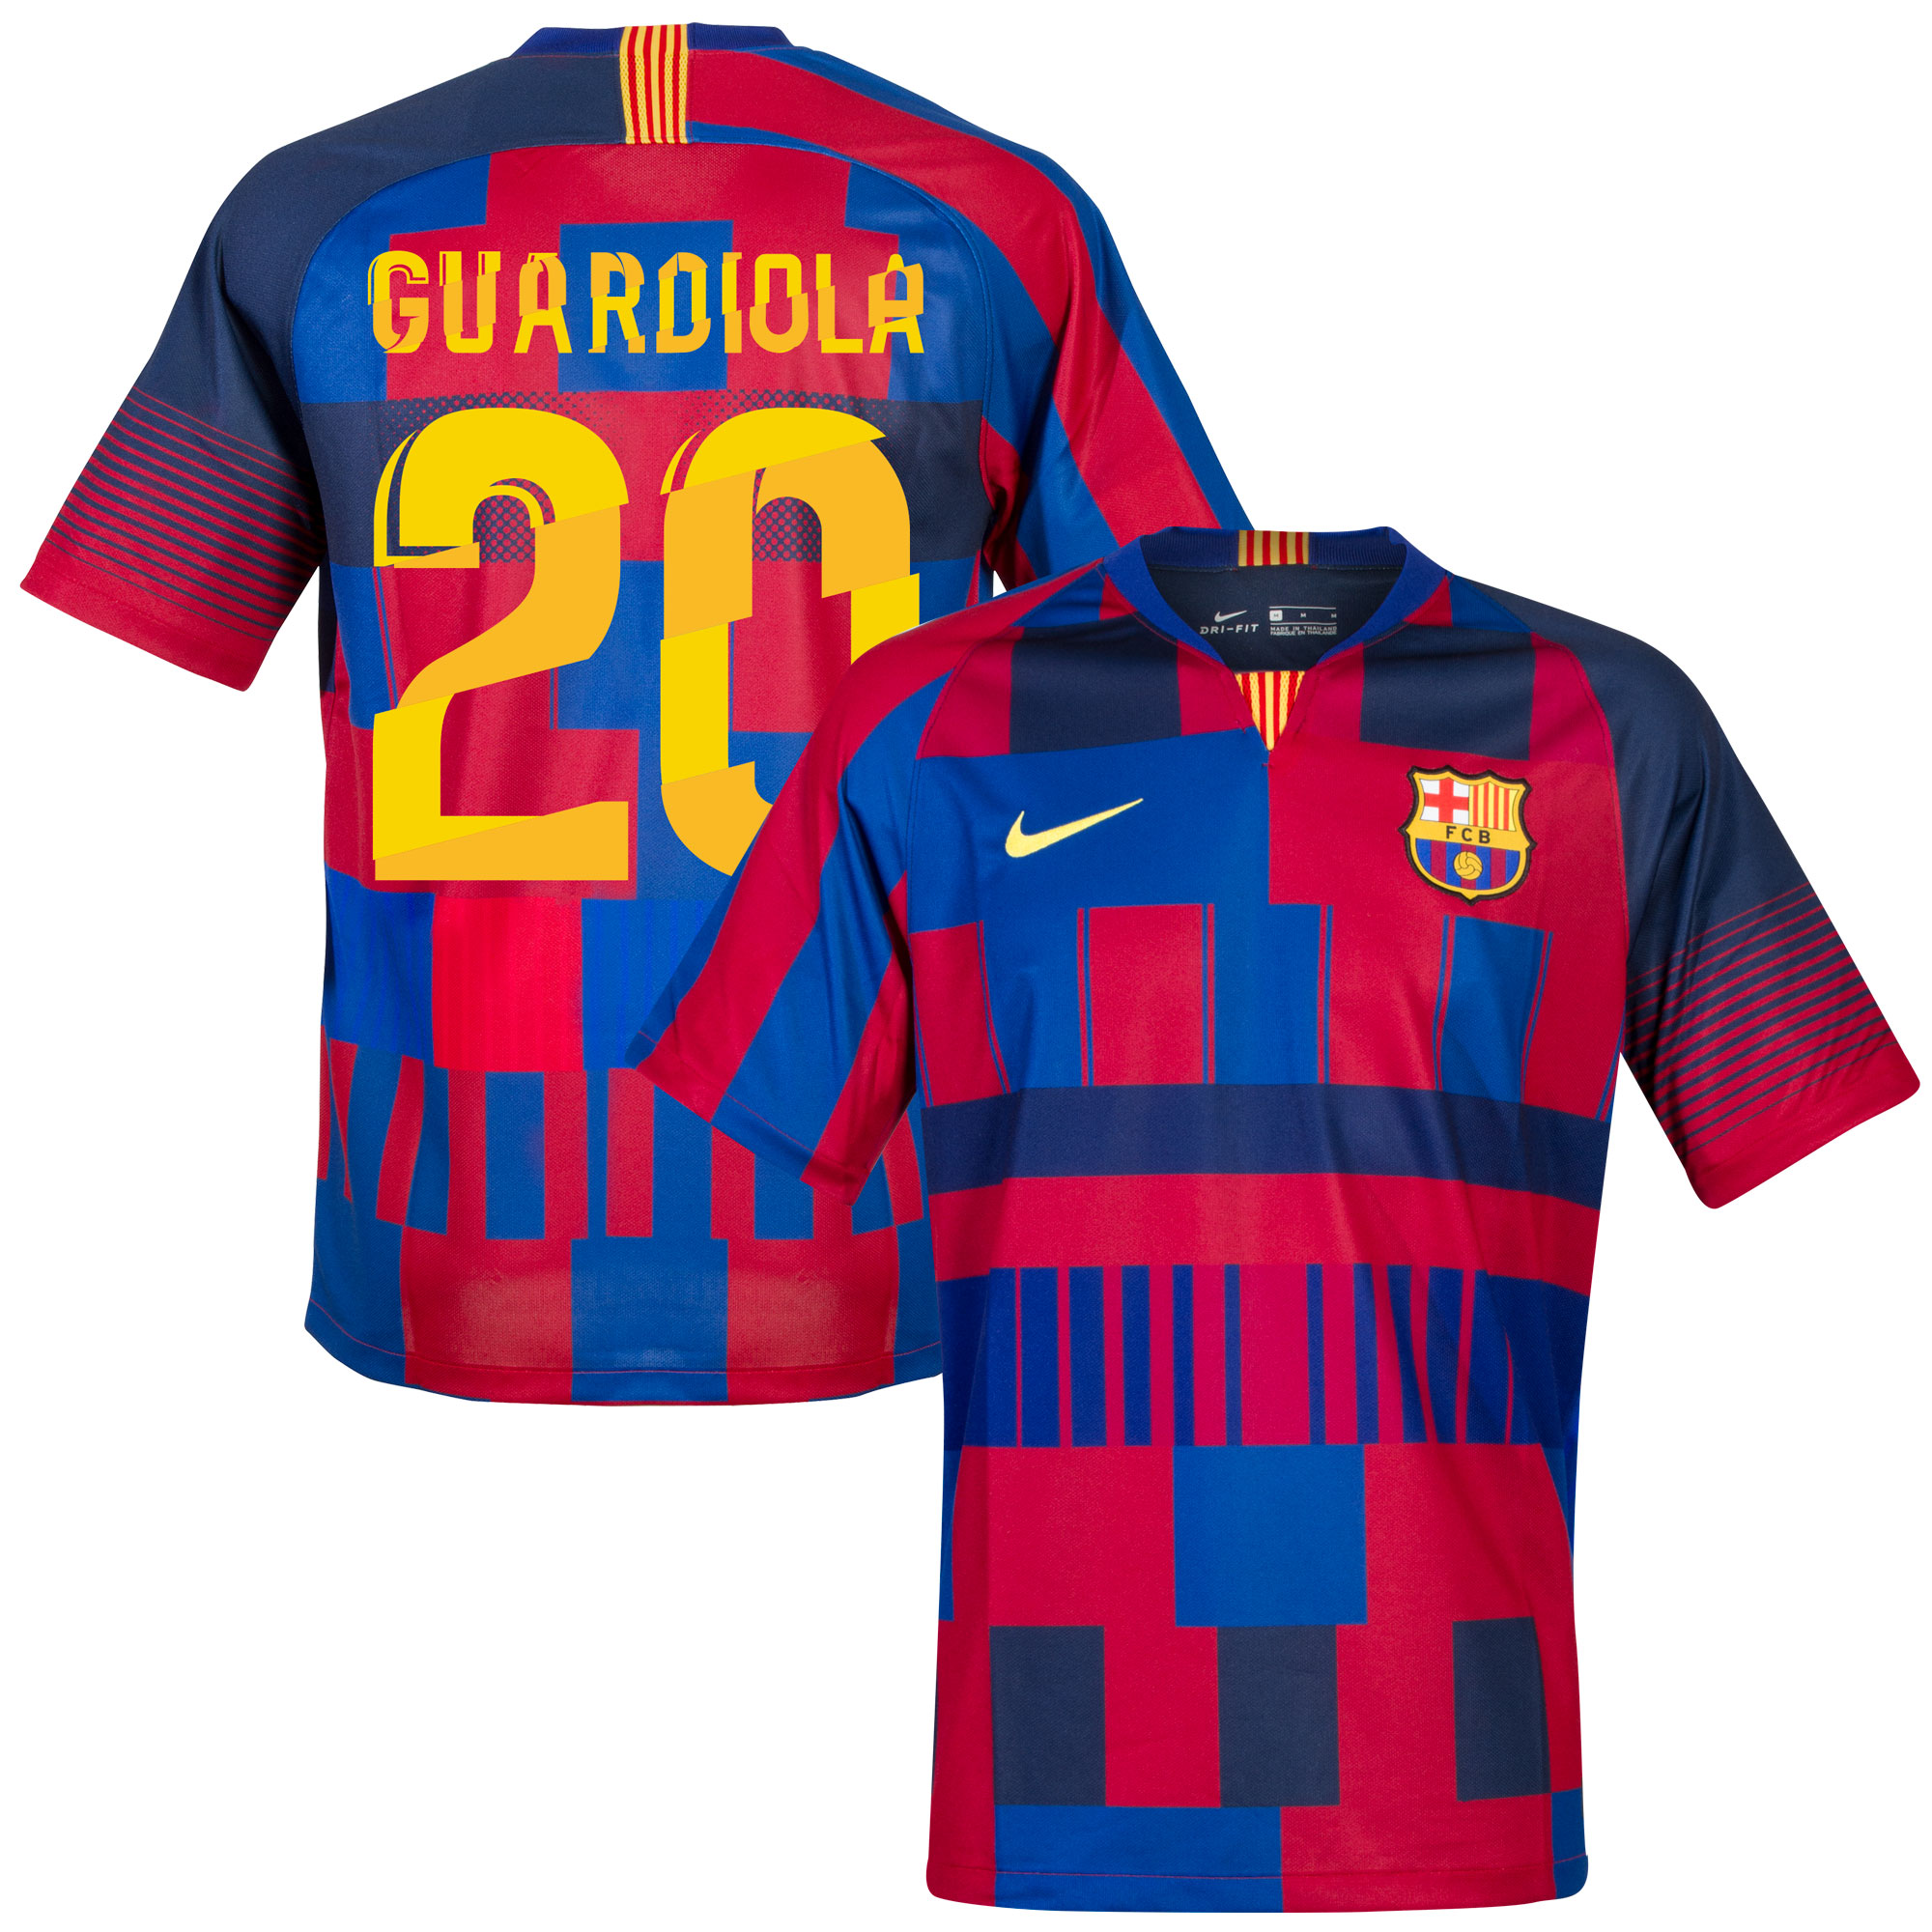 Barcelona x Nike 20th Anniversary Voetbalshirt + Guardiola 20 (Special Edition Fan Style Printing)